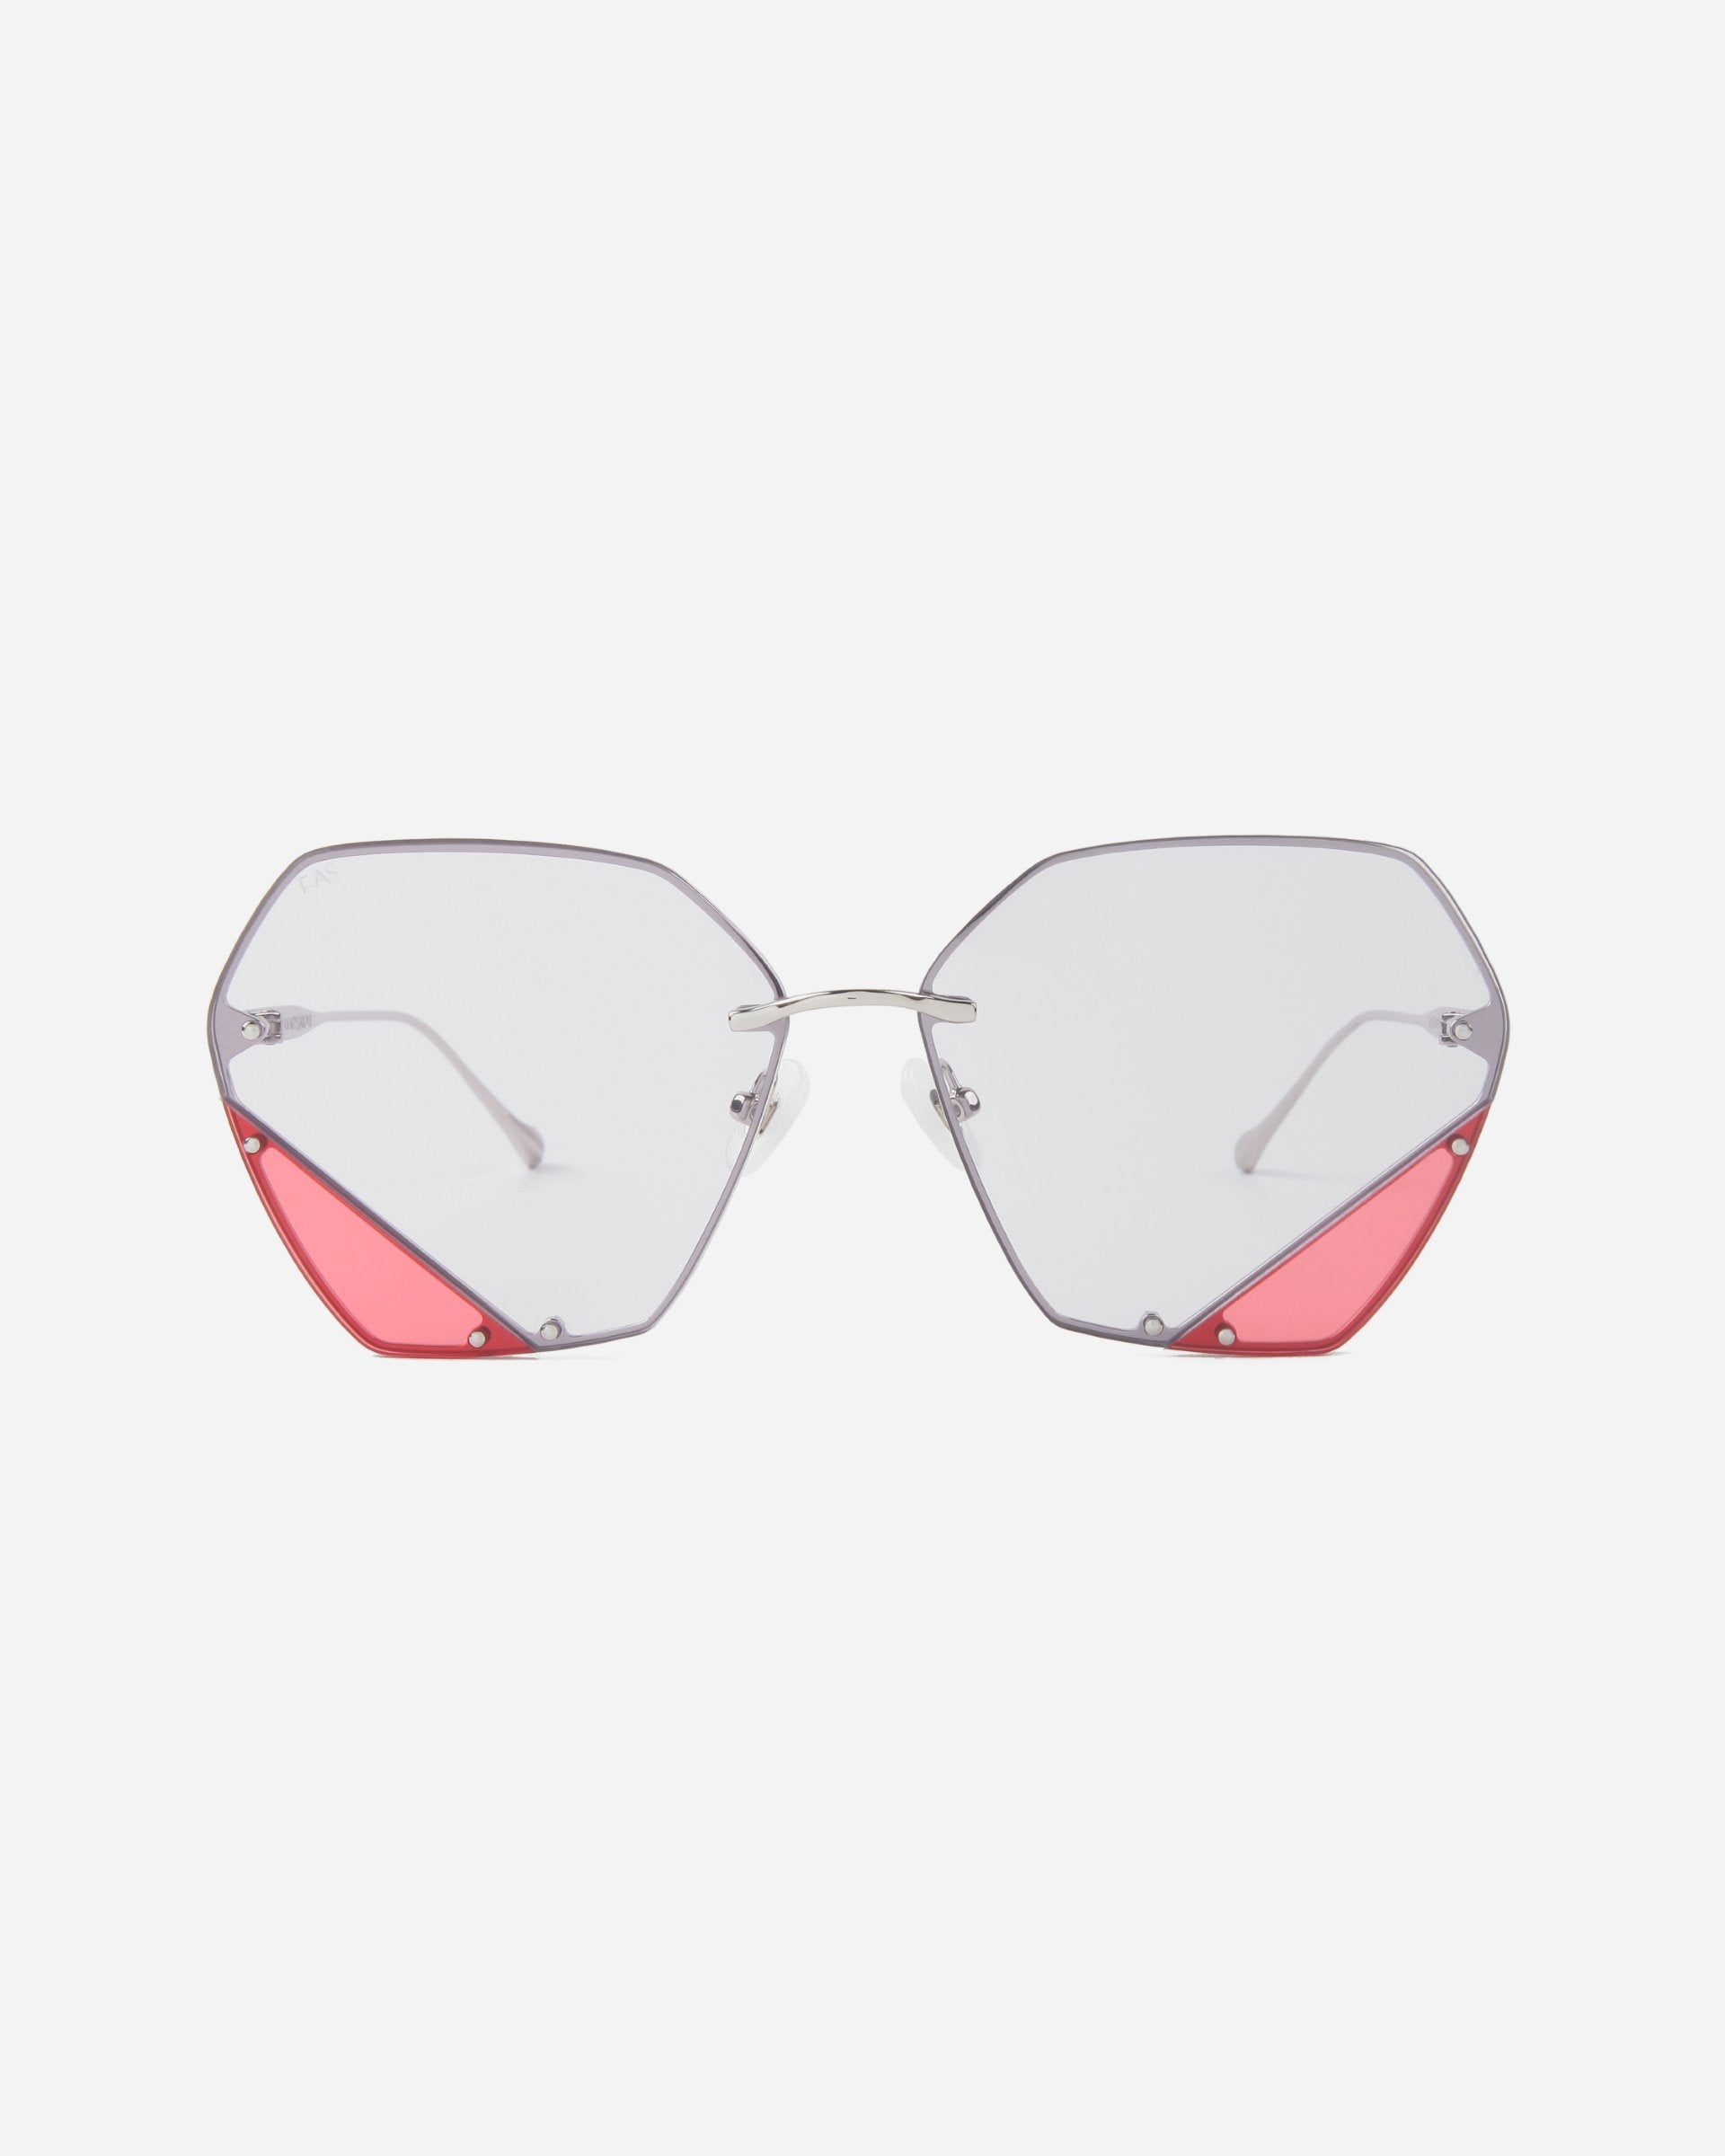 A pair of stylish eyeglasses with UV protection, featuring octagonal clear lenses and silver frames. The bottom corners of the geometric lenses boast pink triangular accents, adding a pop of color to the otherwise minimalist design. The added touch of jadestone nosepads enhances comfort and elegance. These are the Icy by For Art&#39;s Sake®.